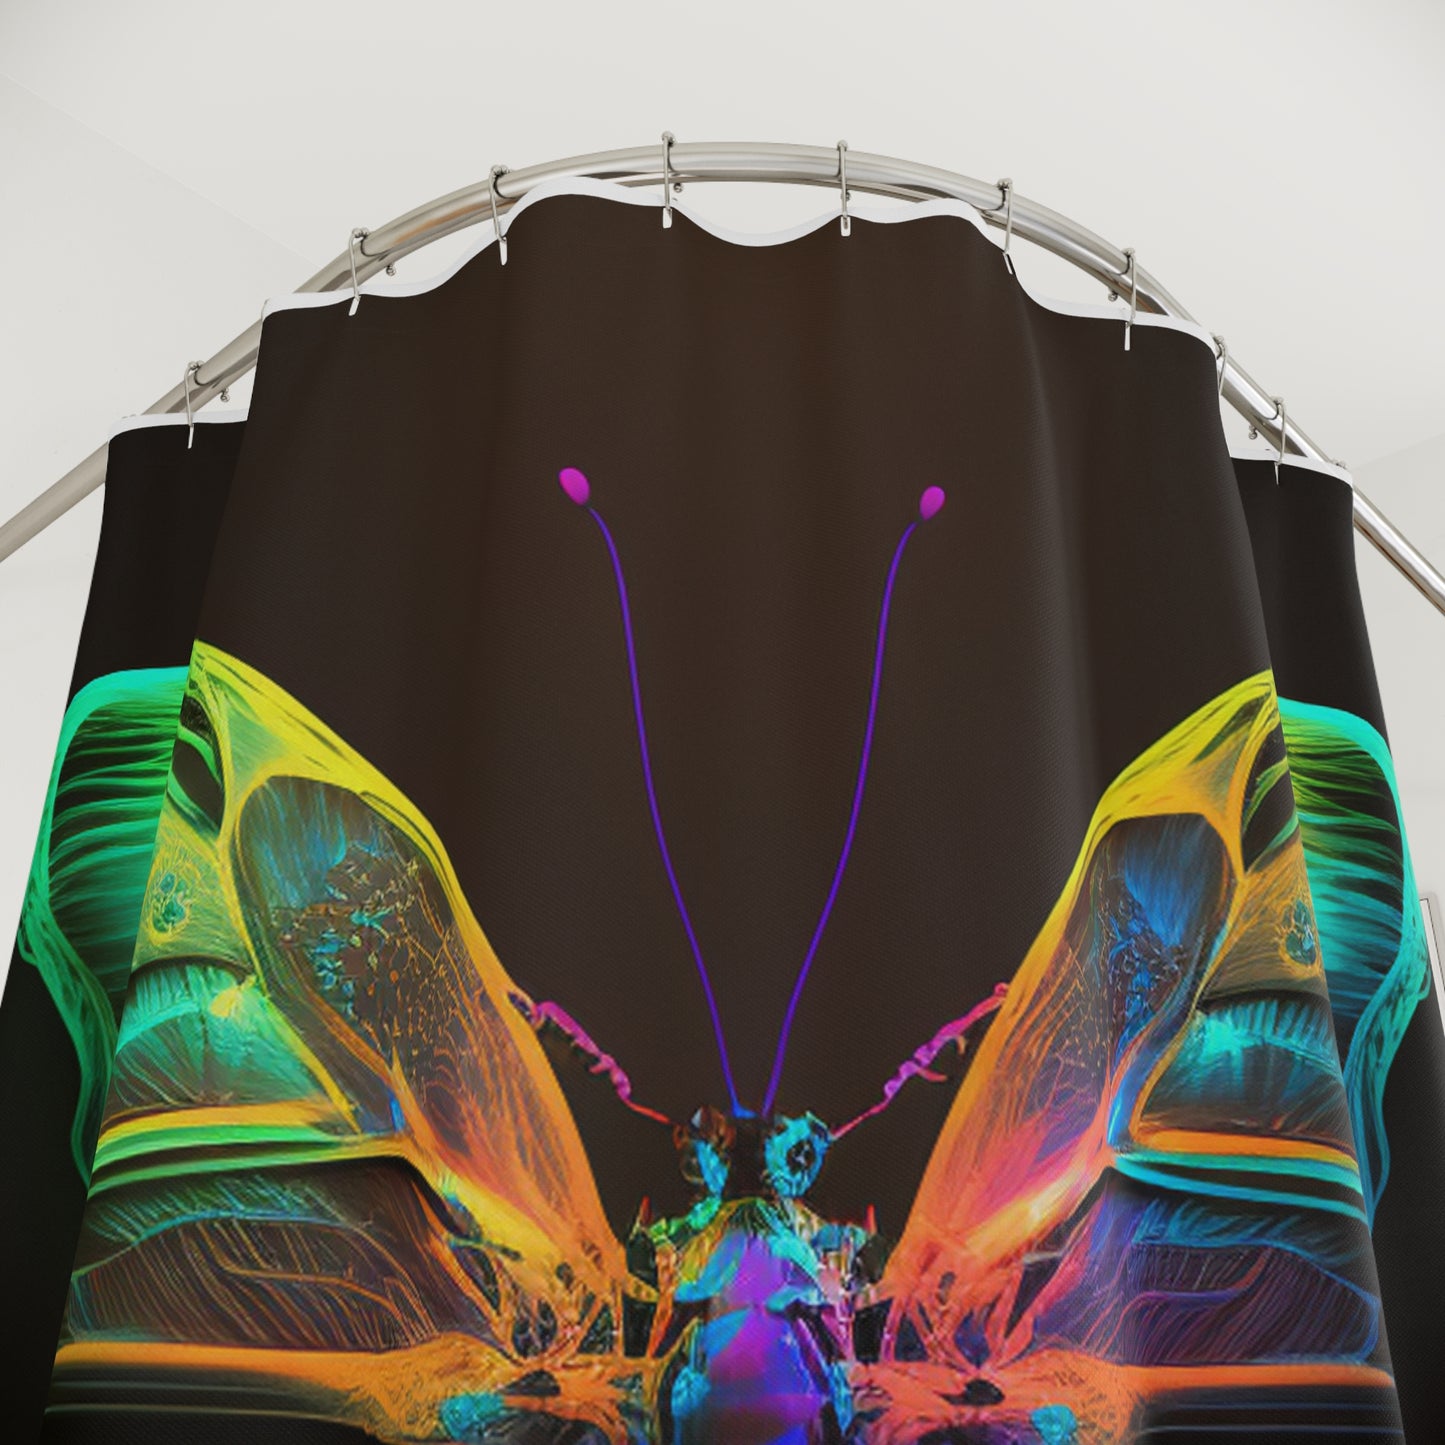 Polyester Shower Curtain Raw Hyper Color Butterfly 3